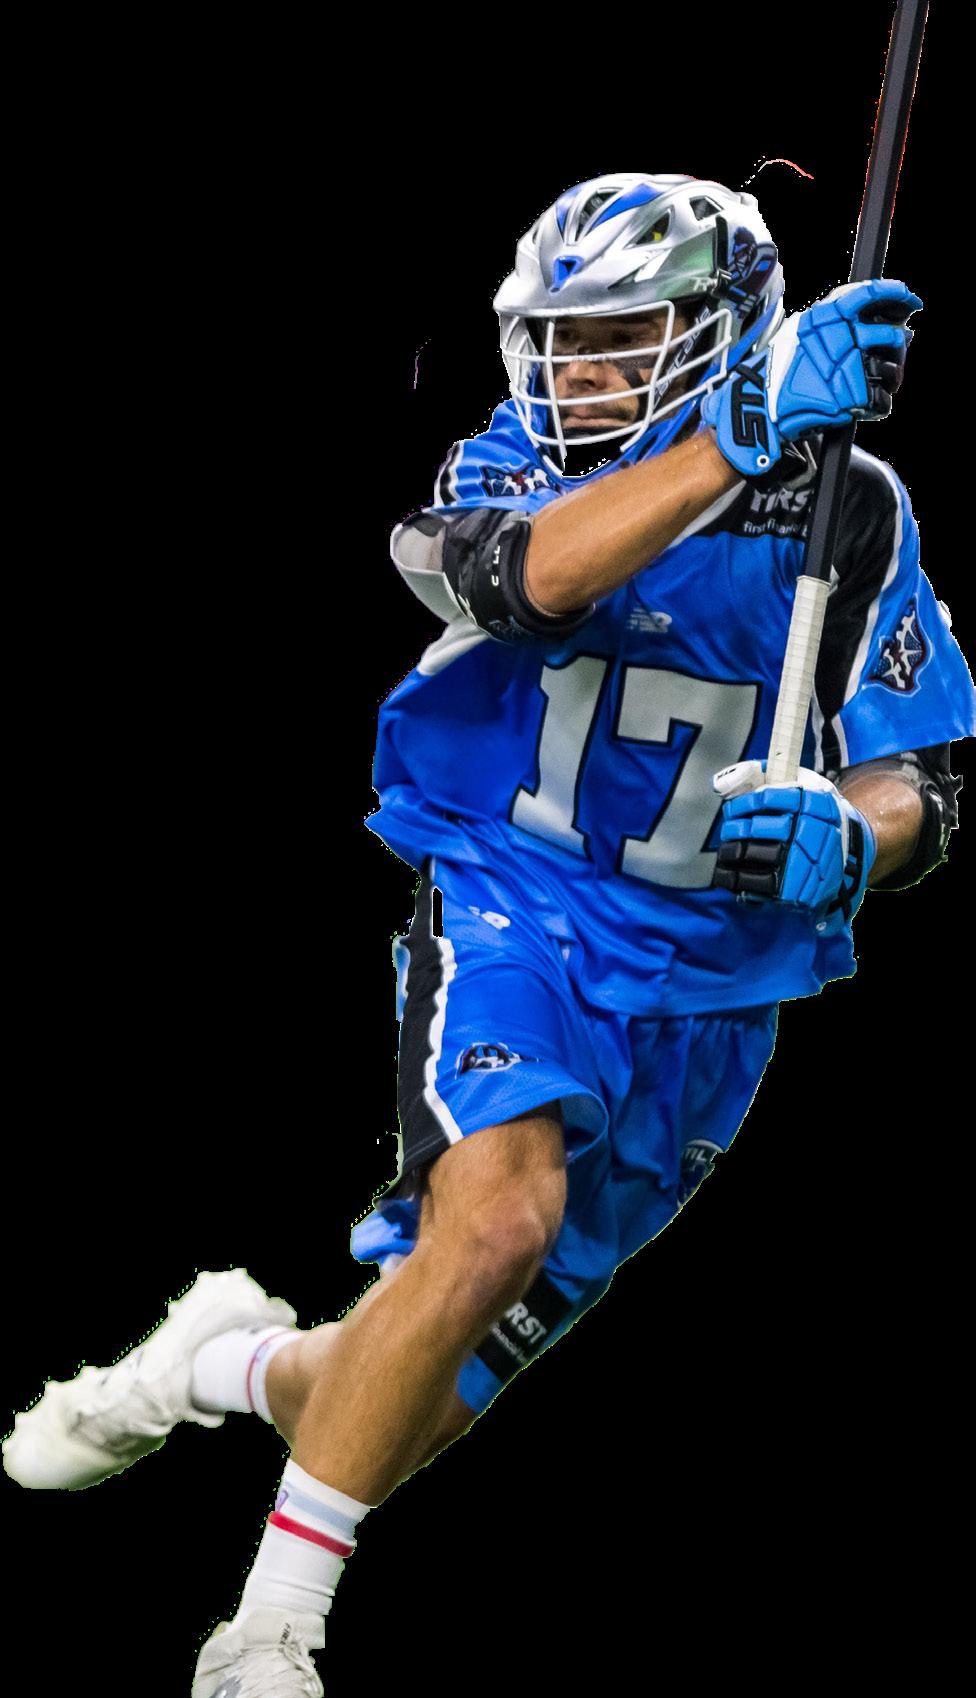 JACKSON PLACE MIDFIELD #17 5 11 185 LBS BORN 8/20/93 HOW ACQUIRED: 2014 MLL DRAFT (25TH OVERALL) JACKSON AT A GLANCE 2017 MLL SEASON: Finished with one goal, 27 ground balls and nine caused turnovers